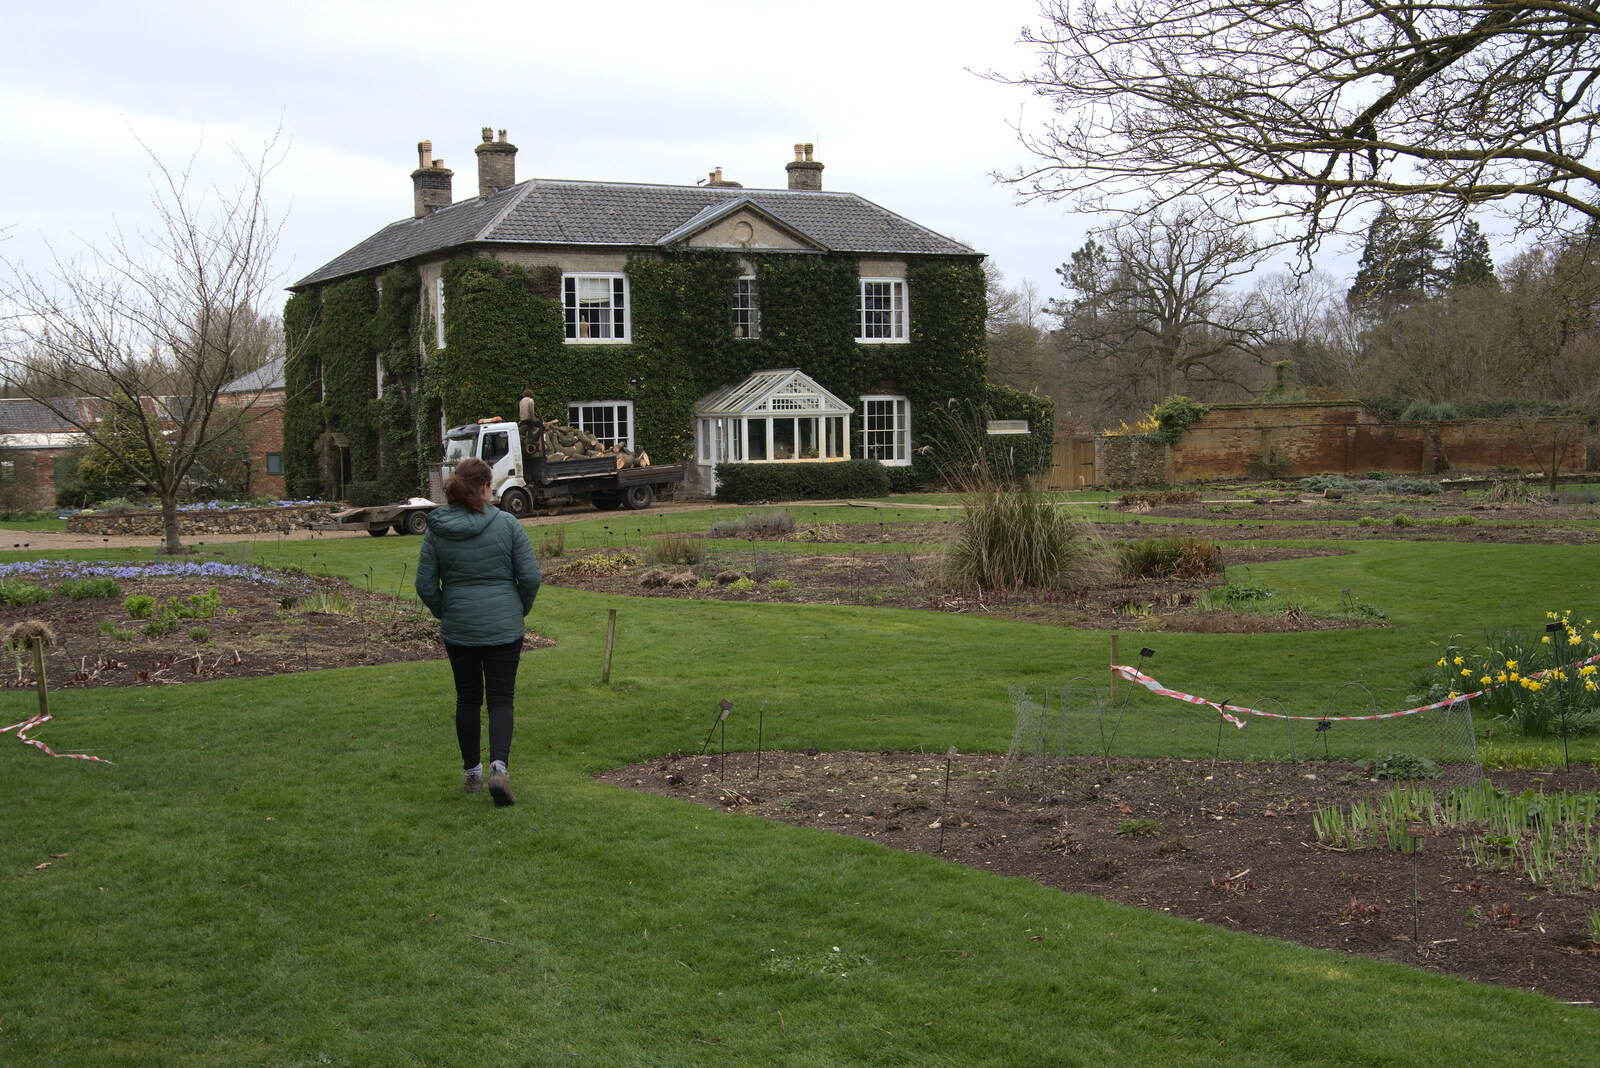 Isobel wanders around the grounds from A Return to Bressingham Steam and Gardens, Bressingham, Norfolk - 28th March 2021